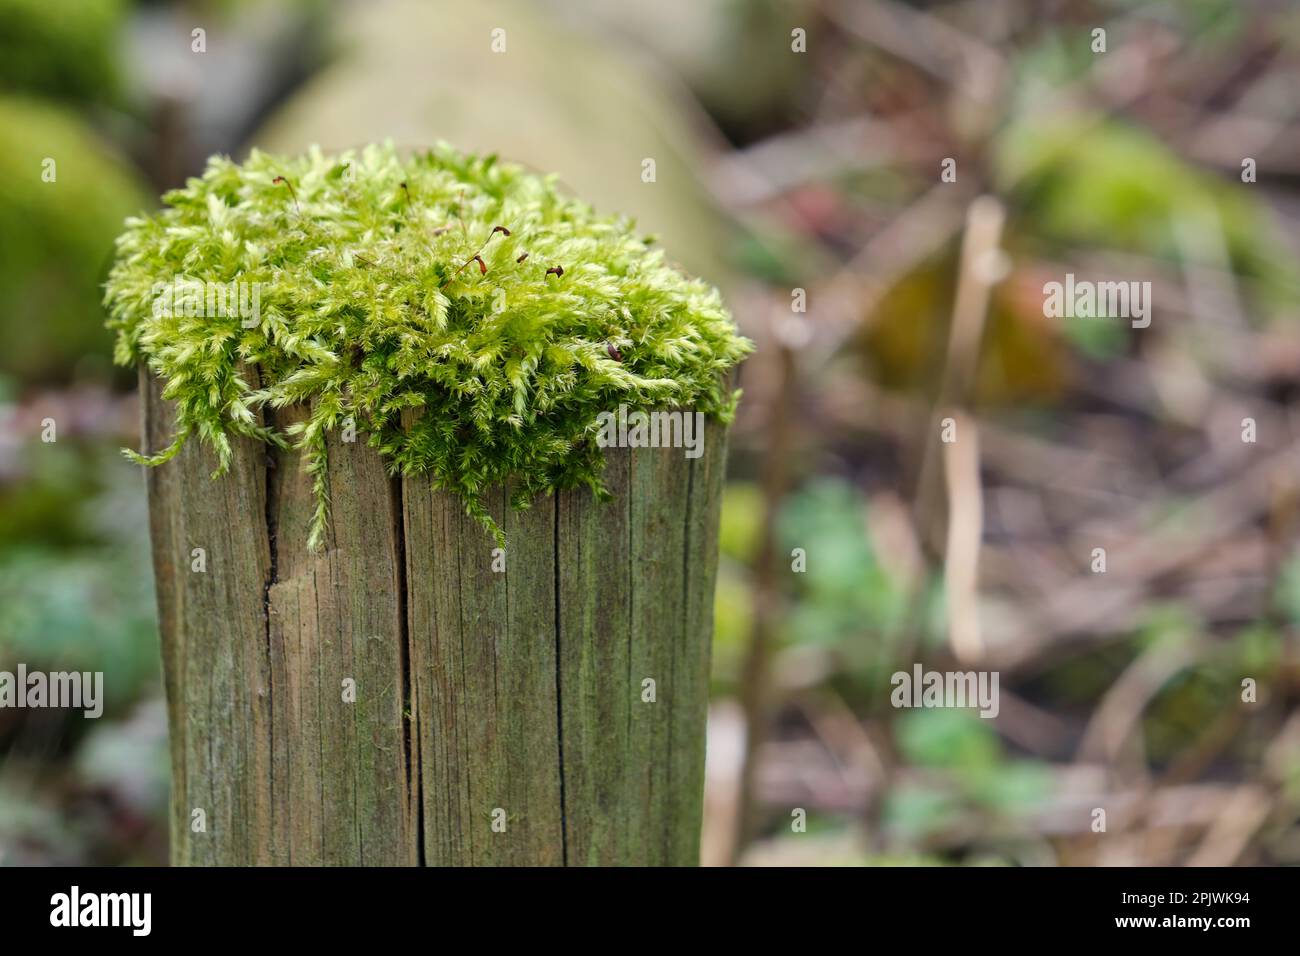 Vibrant green hypnum cupressiforme, cypress-leaved plaitmoss or hypnum moss on a wooden pole in early spring.Also named Bird's-claw Beard Moss. Stock Photo